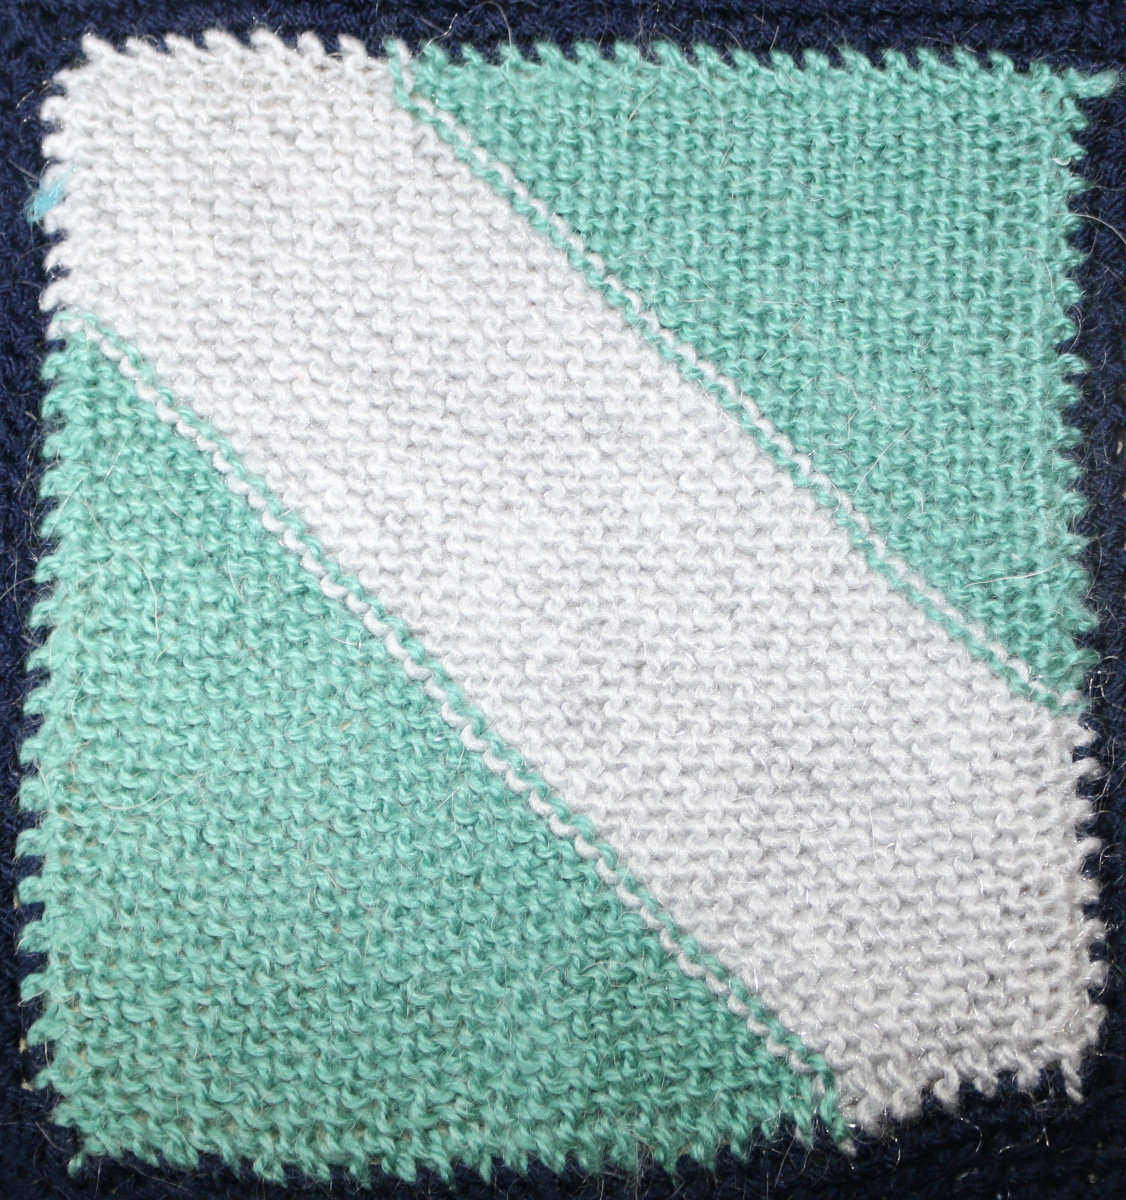 Knitted square: green background with white stripe running top left to bottom right